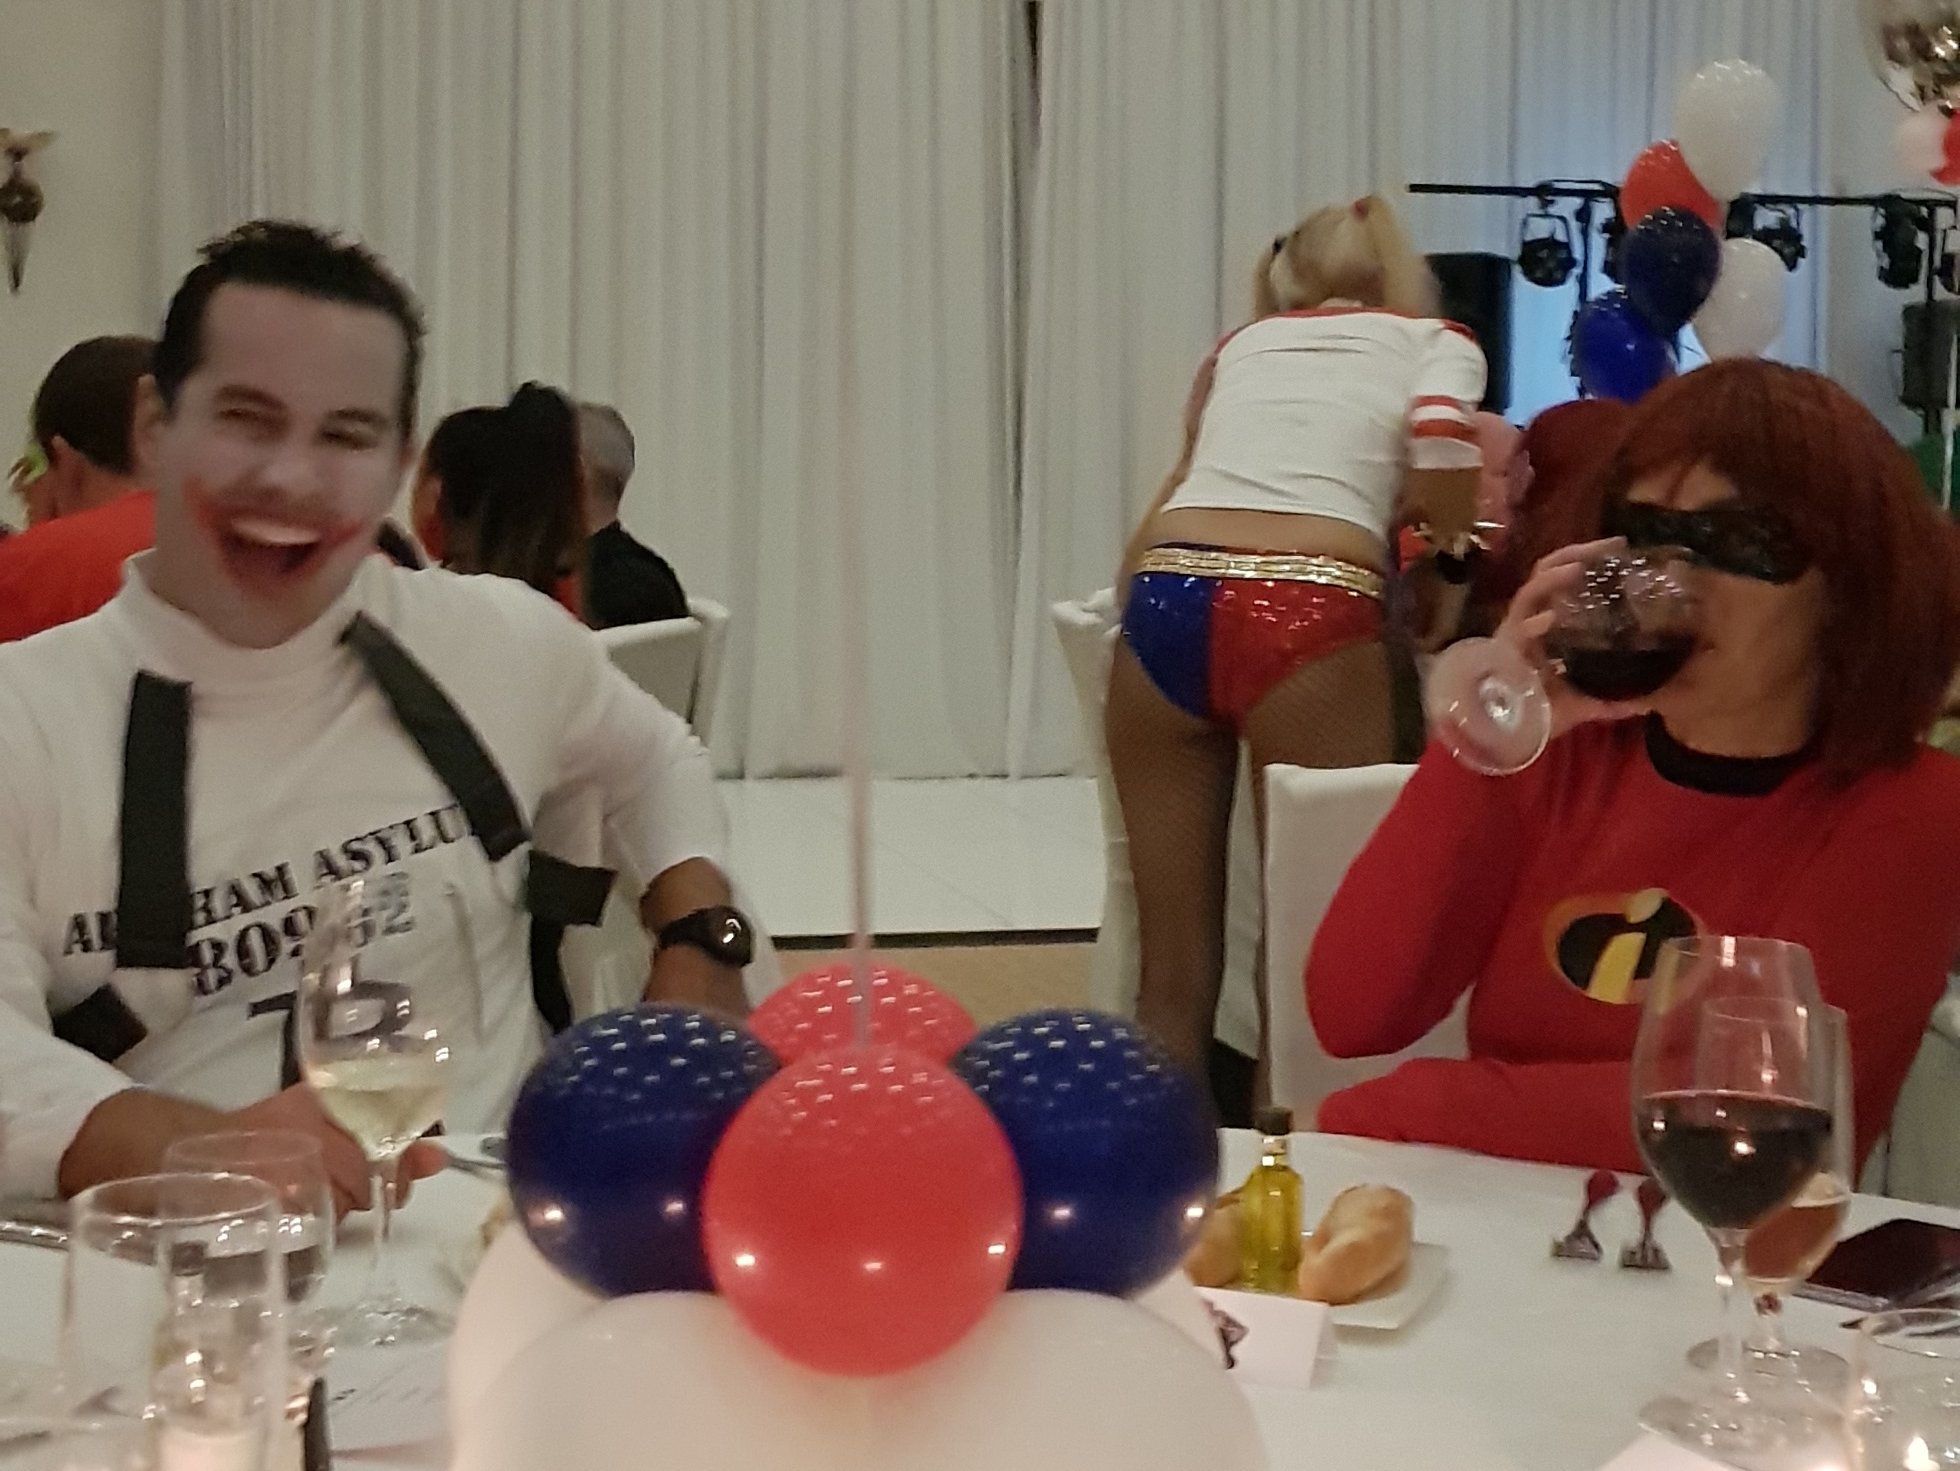 cosplay party with guests dressed as Harley Quinn and Joker